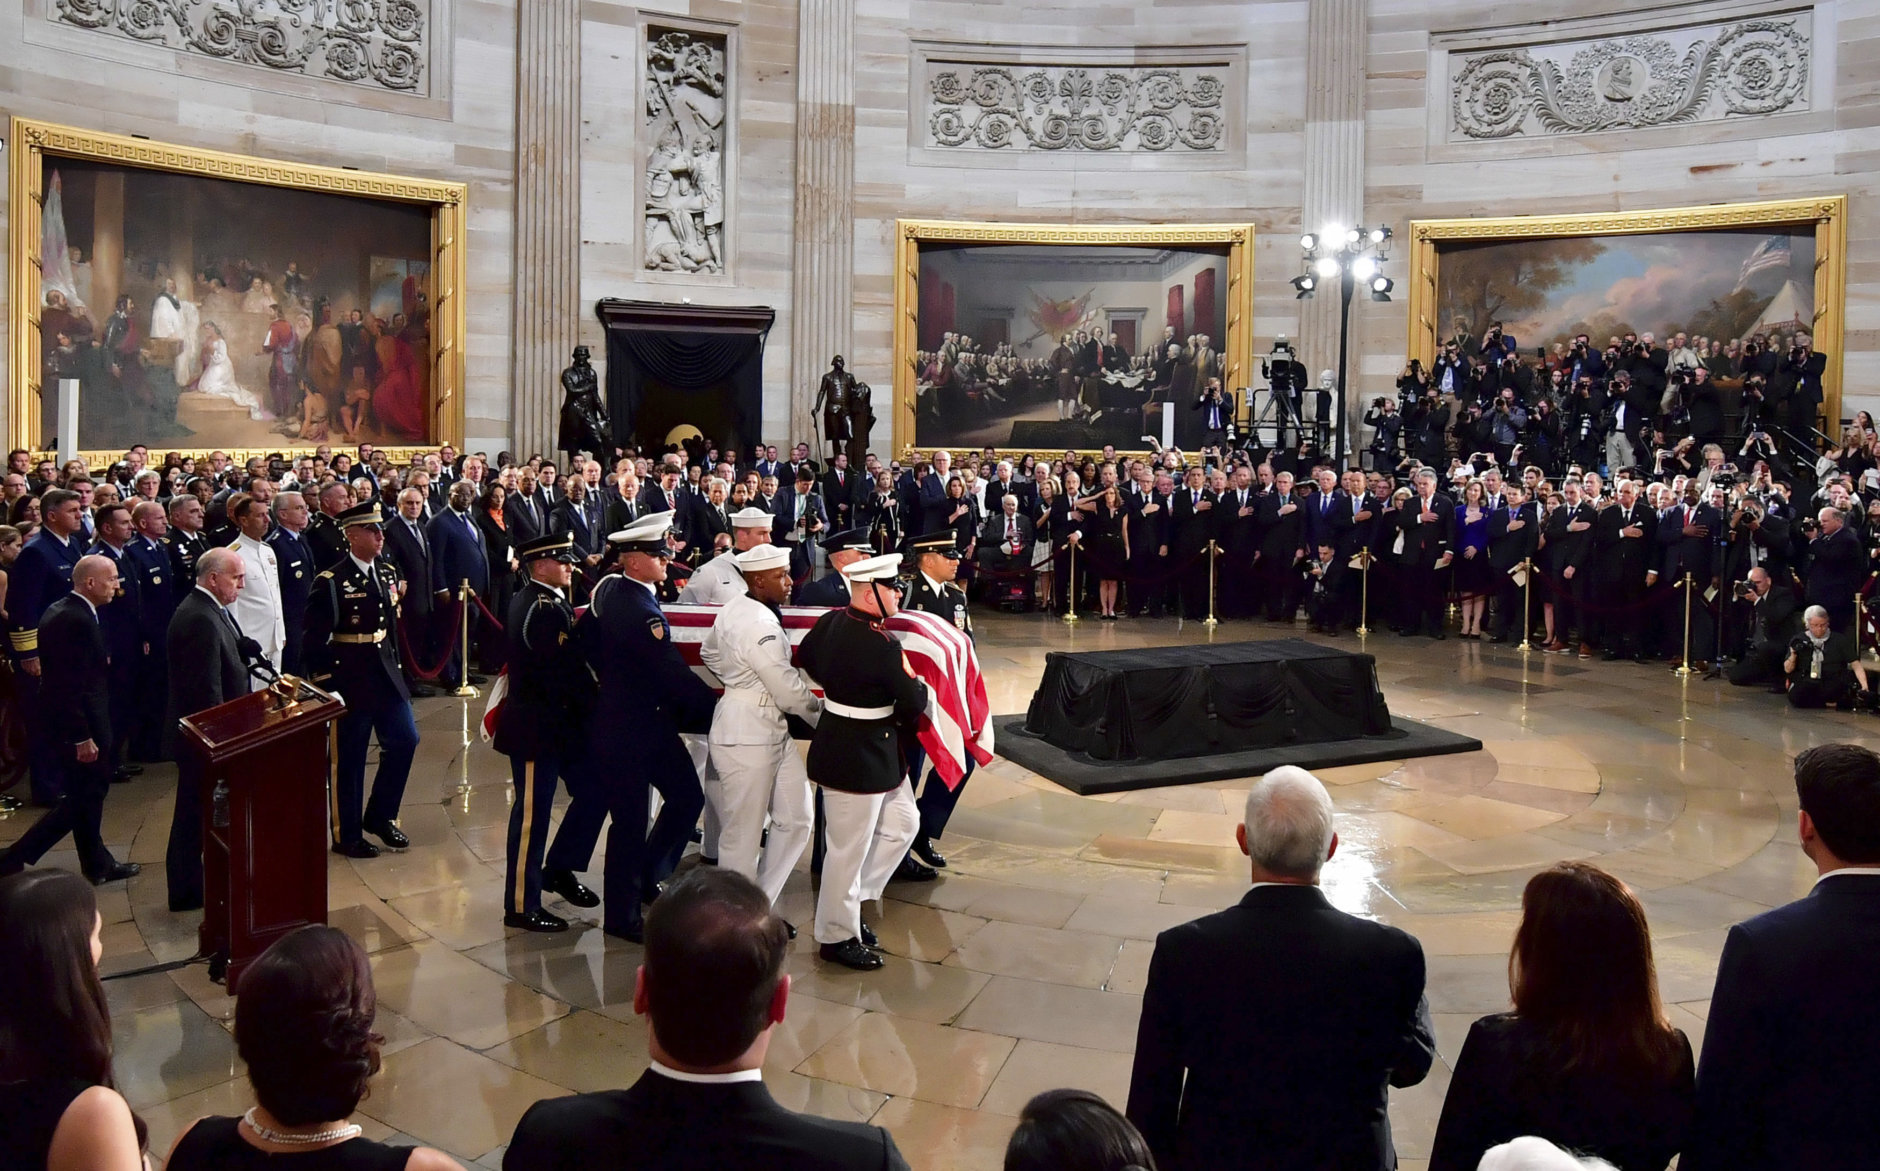 The flag-draped casket of Sen. John McCain, R-Ariz., is carried into the U.S. Capitol Rotunda Friday, Aug. 31, 2018, in Washington, to be placed on the Lincoln Catafalque. Kevin Dietsch/Pool Photo via AP)